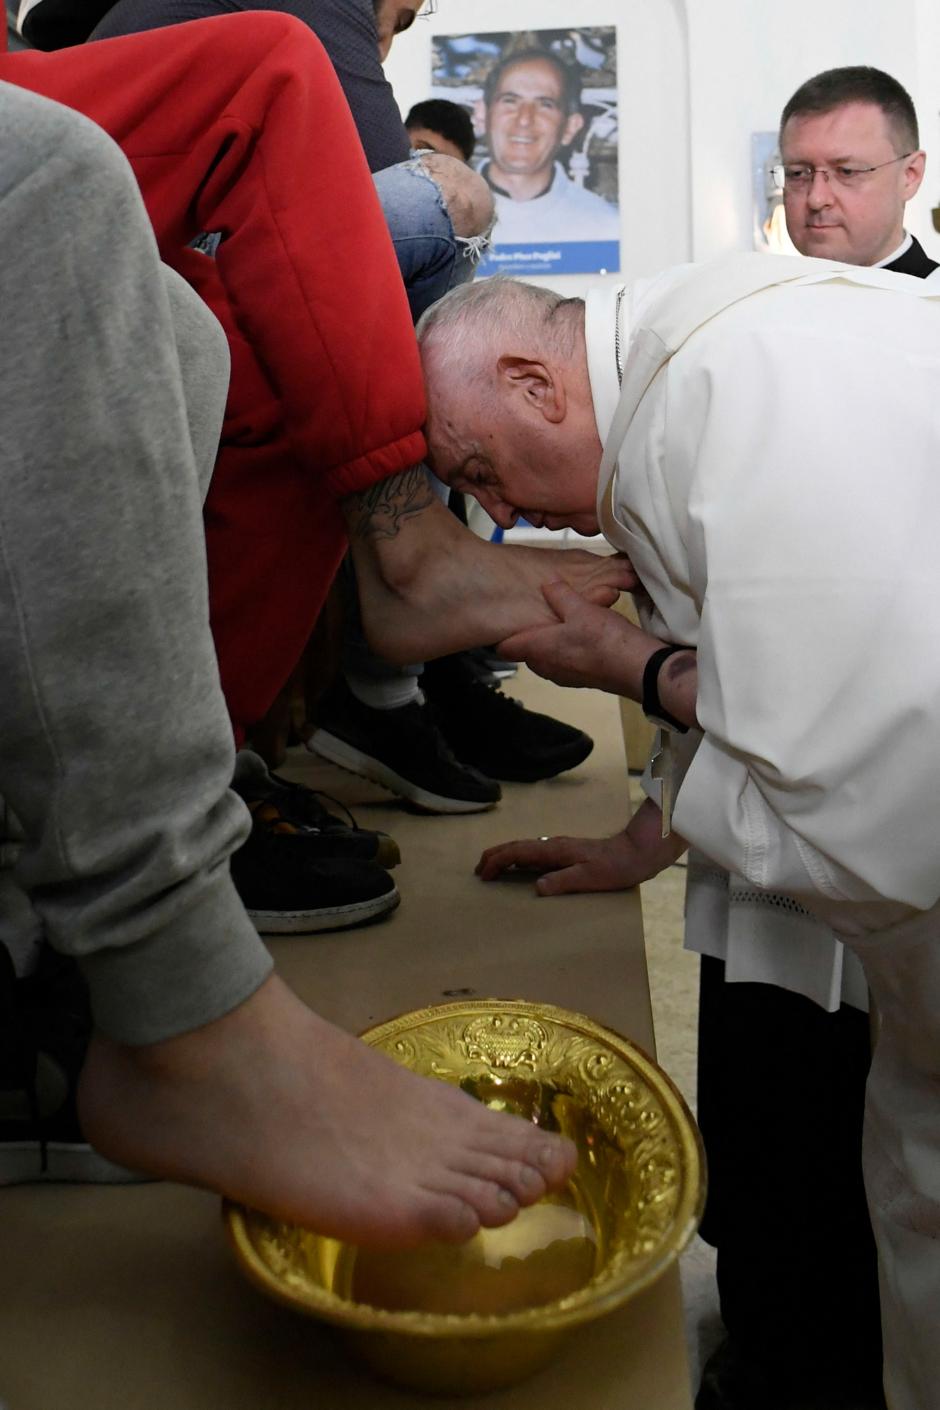 This photo taken and issued as a handout on April 6, 2023 by the Vatican Media shows Pope Francis kissing the foot of a detainee, while performing the "Washing of the Feet" of twelve young detainees at the "Casal del Marmo" Penal Institute for minors in Rome, as part of celebrations of the Holy Week. (Photo by Handout / VATICAN MEDIA / AFP) / RESTRICTED TO EDITORIAL USE - MANDATORY CREDIT "AFP PHOTO / VATICAN MEDIA" - NO MARKETING NO ADVERTISING CAMPAIGNS - DISTRIBUTED AS A SERVICE TO CLIENTS